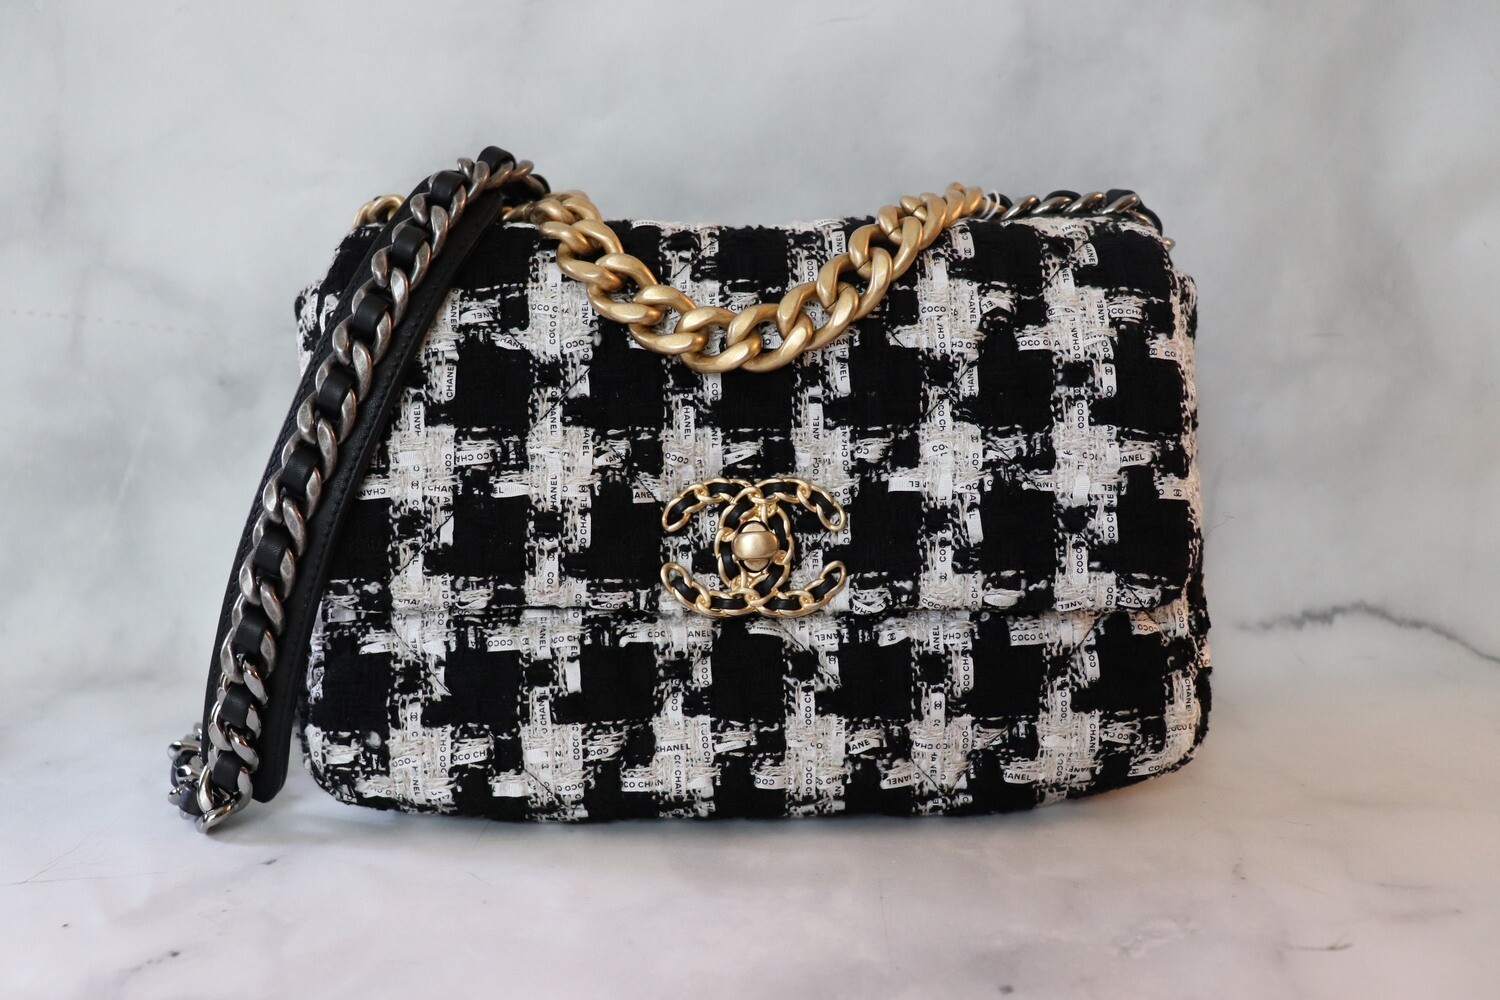 Chanel 19 Small Black and White Tweed, New in Box - Julia Rose Boston